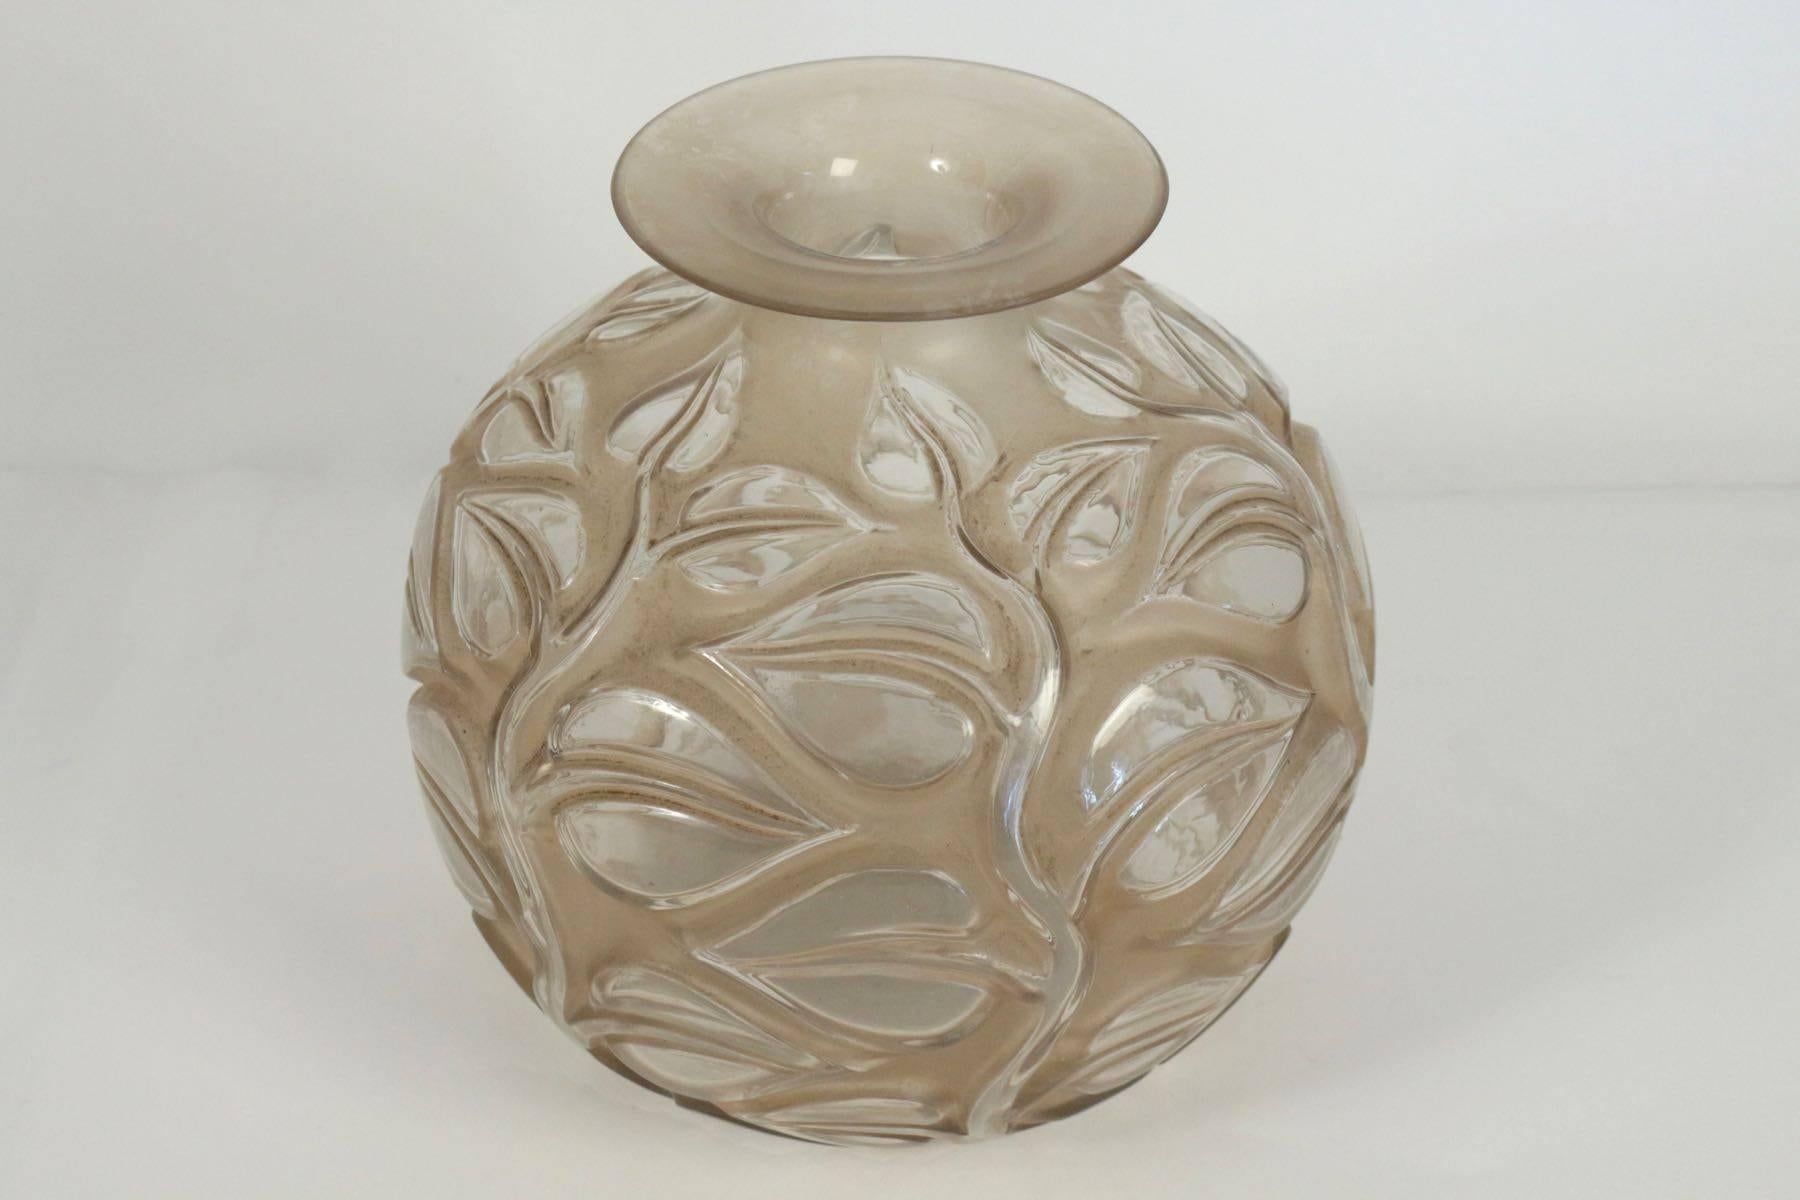 Lalique vase sophora.
 26 cm tall frosted glass decorated with large leaves on recessed thick stems under a flat and widening rim.
Sophora, model created in 1926, non repris après 1947.
Signed cachet R. Lalique France sous la base.
Hauteur: 26